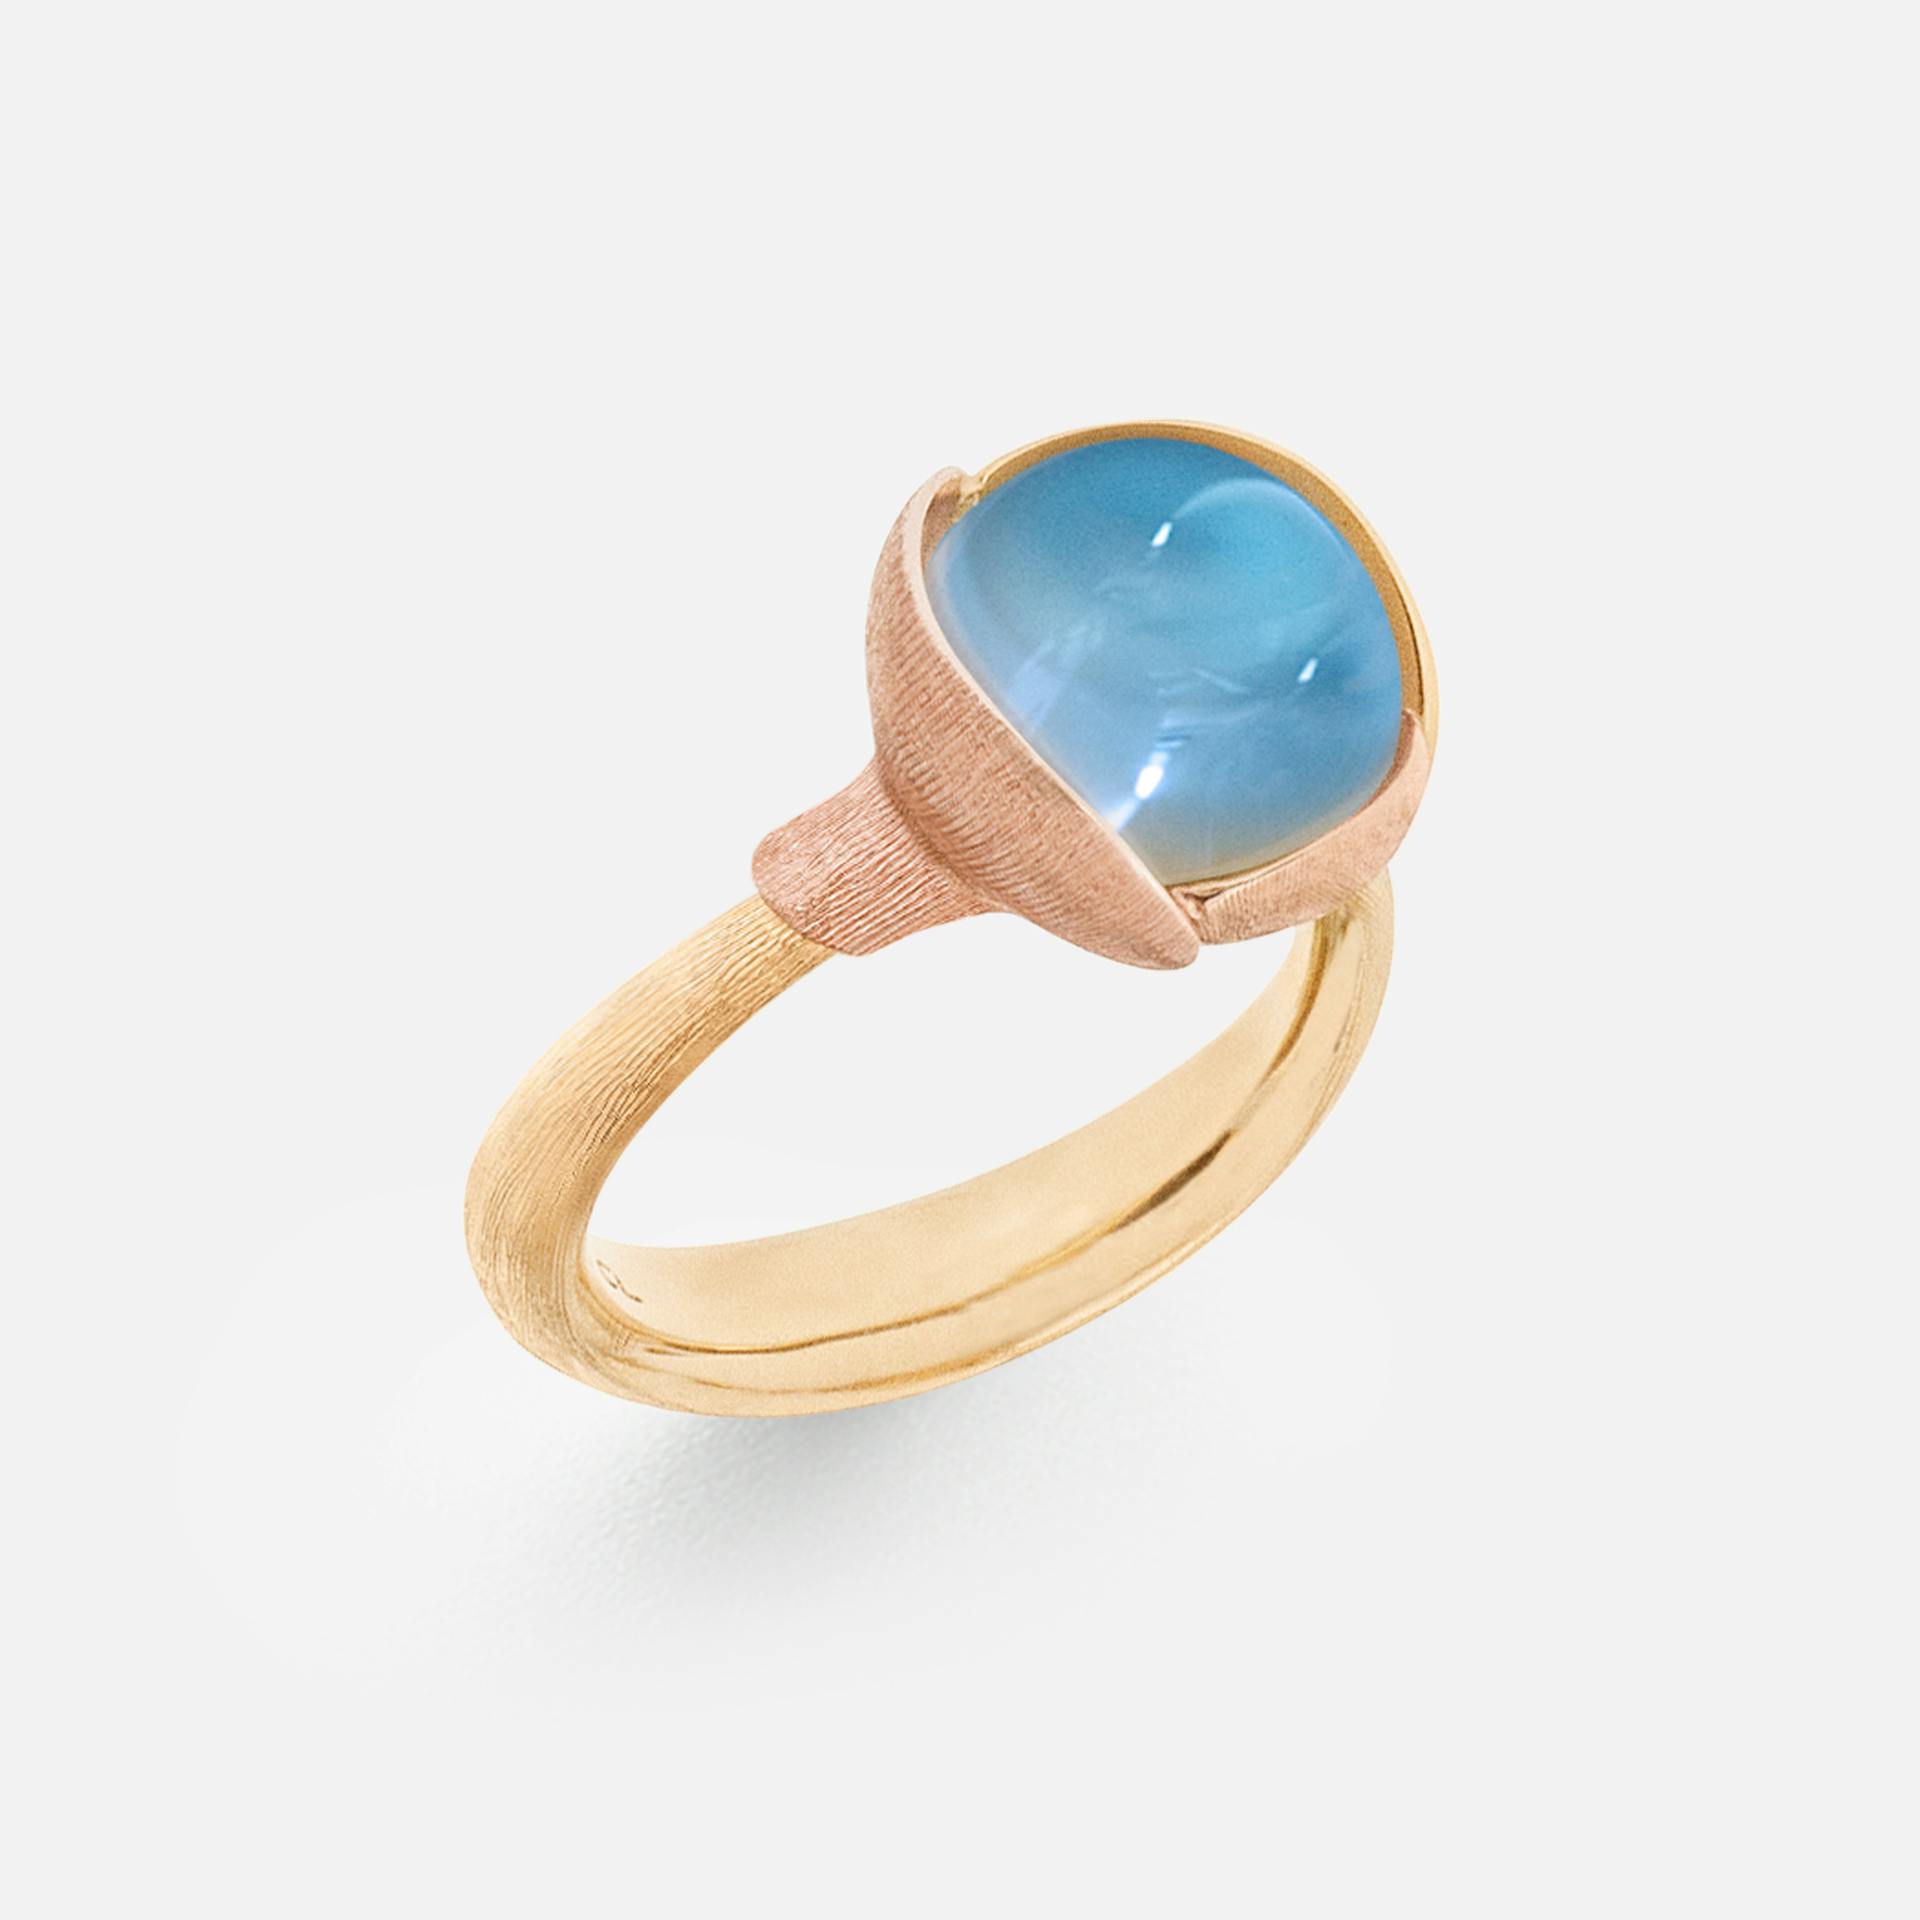 Lotus Ring size 2 in Yellow and Rose Gold  with Blue Topaz  |  Ole Lynggaard Copenhagen